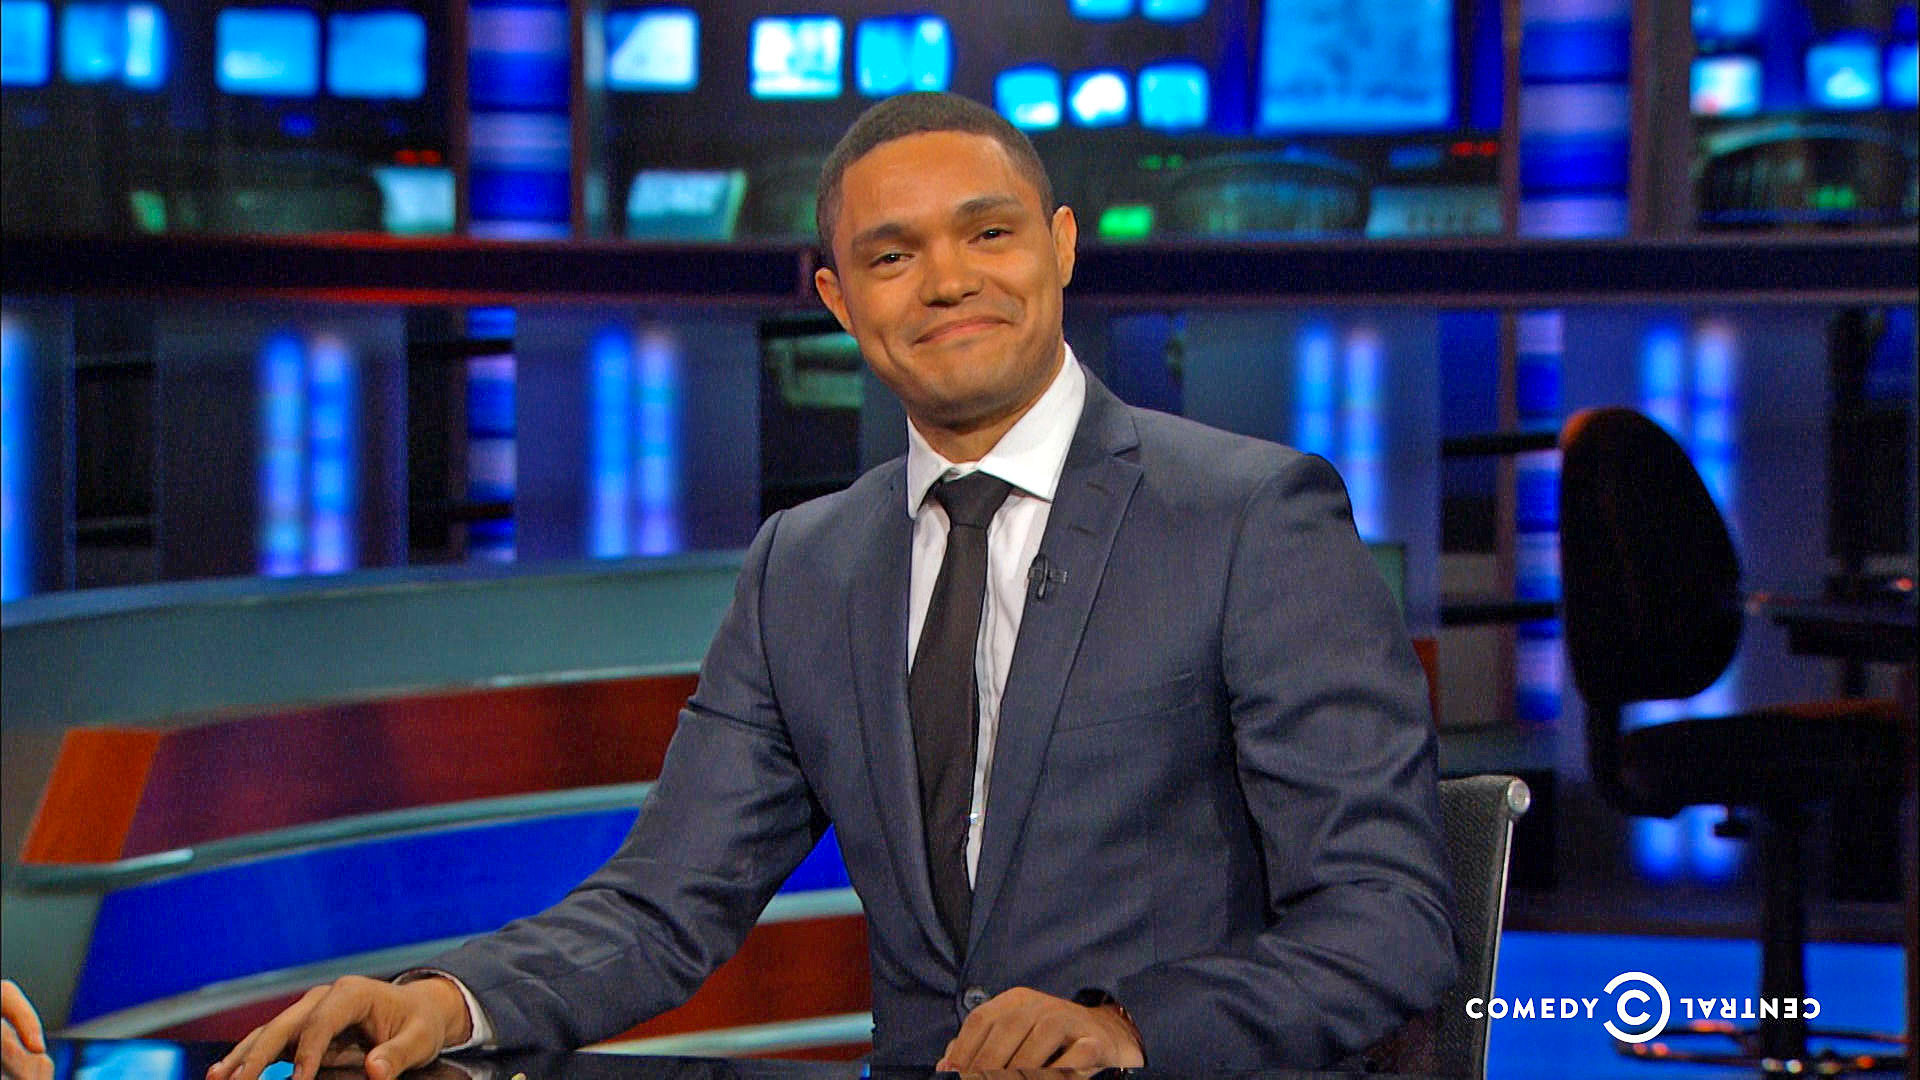 The Daily Show with Trevor Noah Comedy Central Series Debuts September